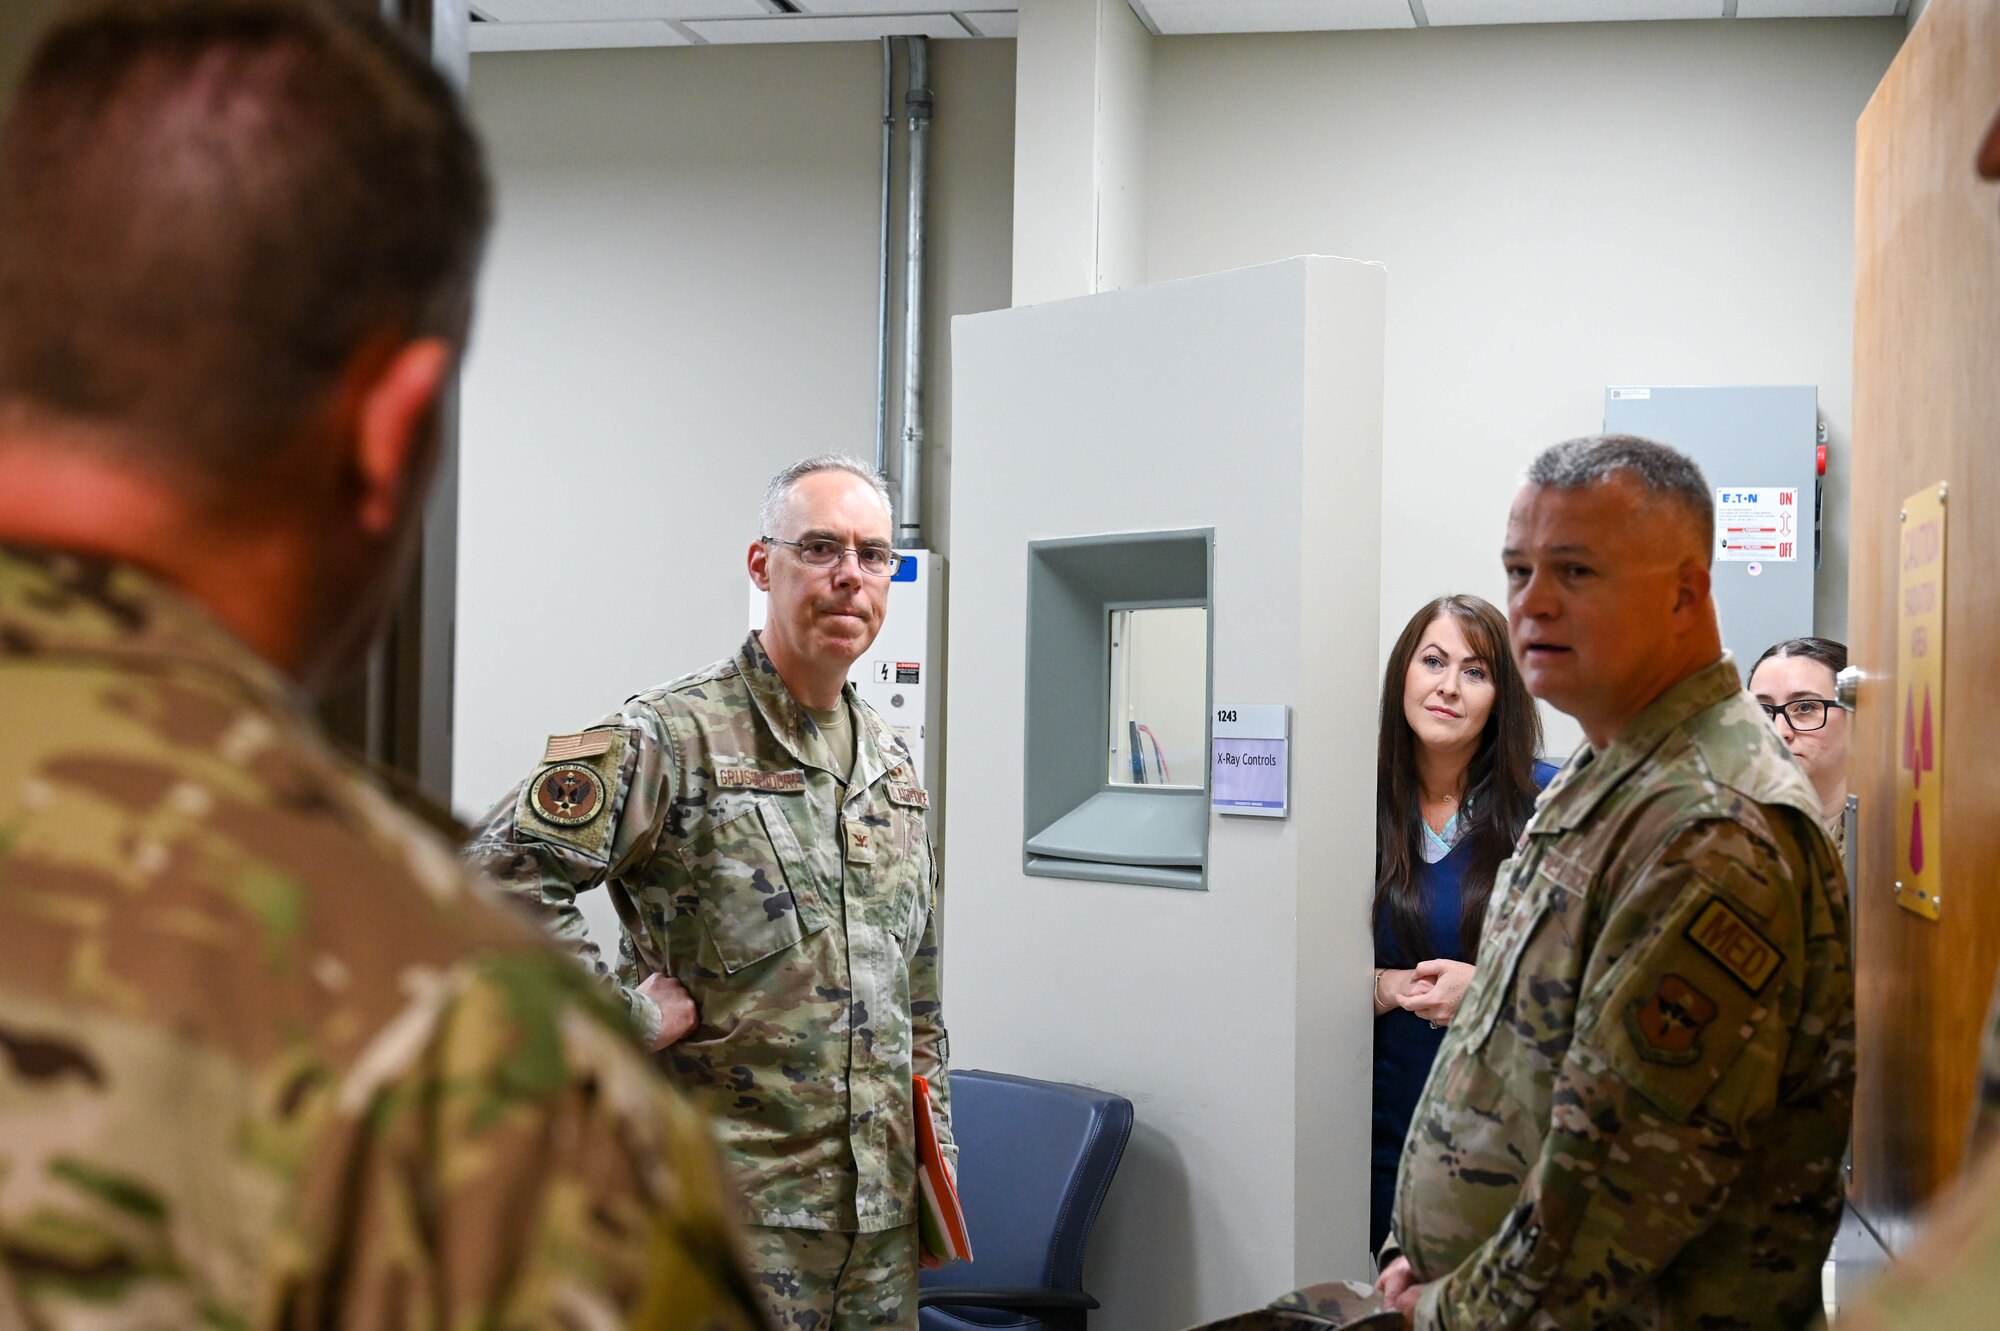 U.S. Air Force Col. Christopher Grussendorf, left, Air Education and Training Command (AETC) surgeon general, and Chief Master Sgt. Donald Cook, right, AETC chief of enlisted medical force, walk through the x-ray room with members of the radiology team from the 97th Healthcare Operations Squadron, during a tour at Altus Air Force Base, Oklahoma, Sept. 13, 2023. Members of the radiology clinic upgraded their medical equipment to help clinicians deliver more precise and efficient care. (U.S. Air Force photo by Airman 1st Class Heidi Bucins)